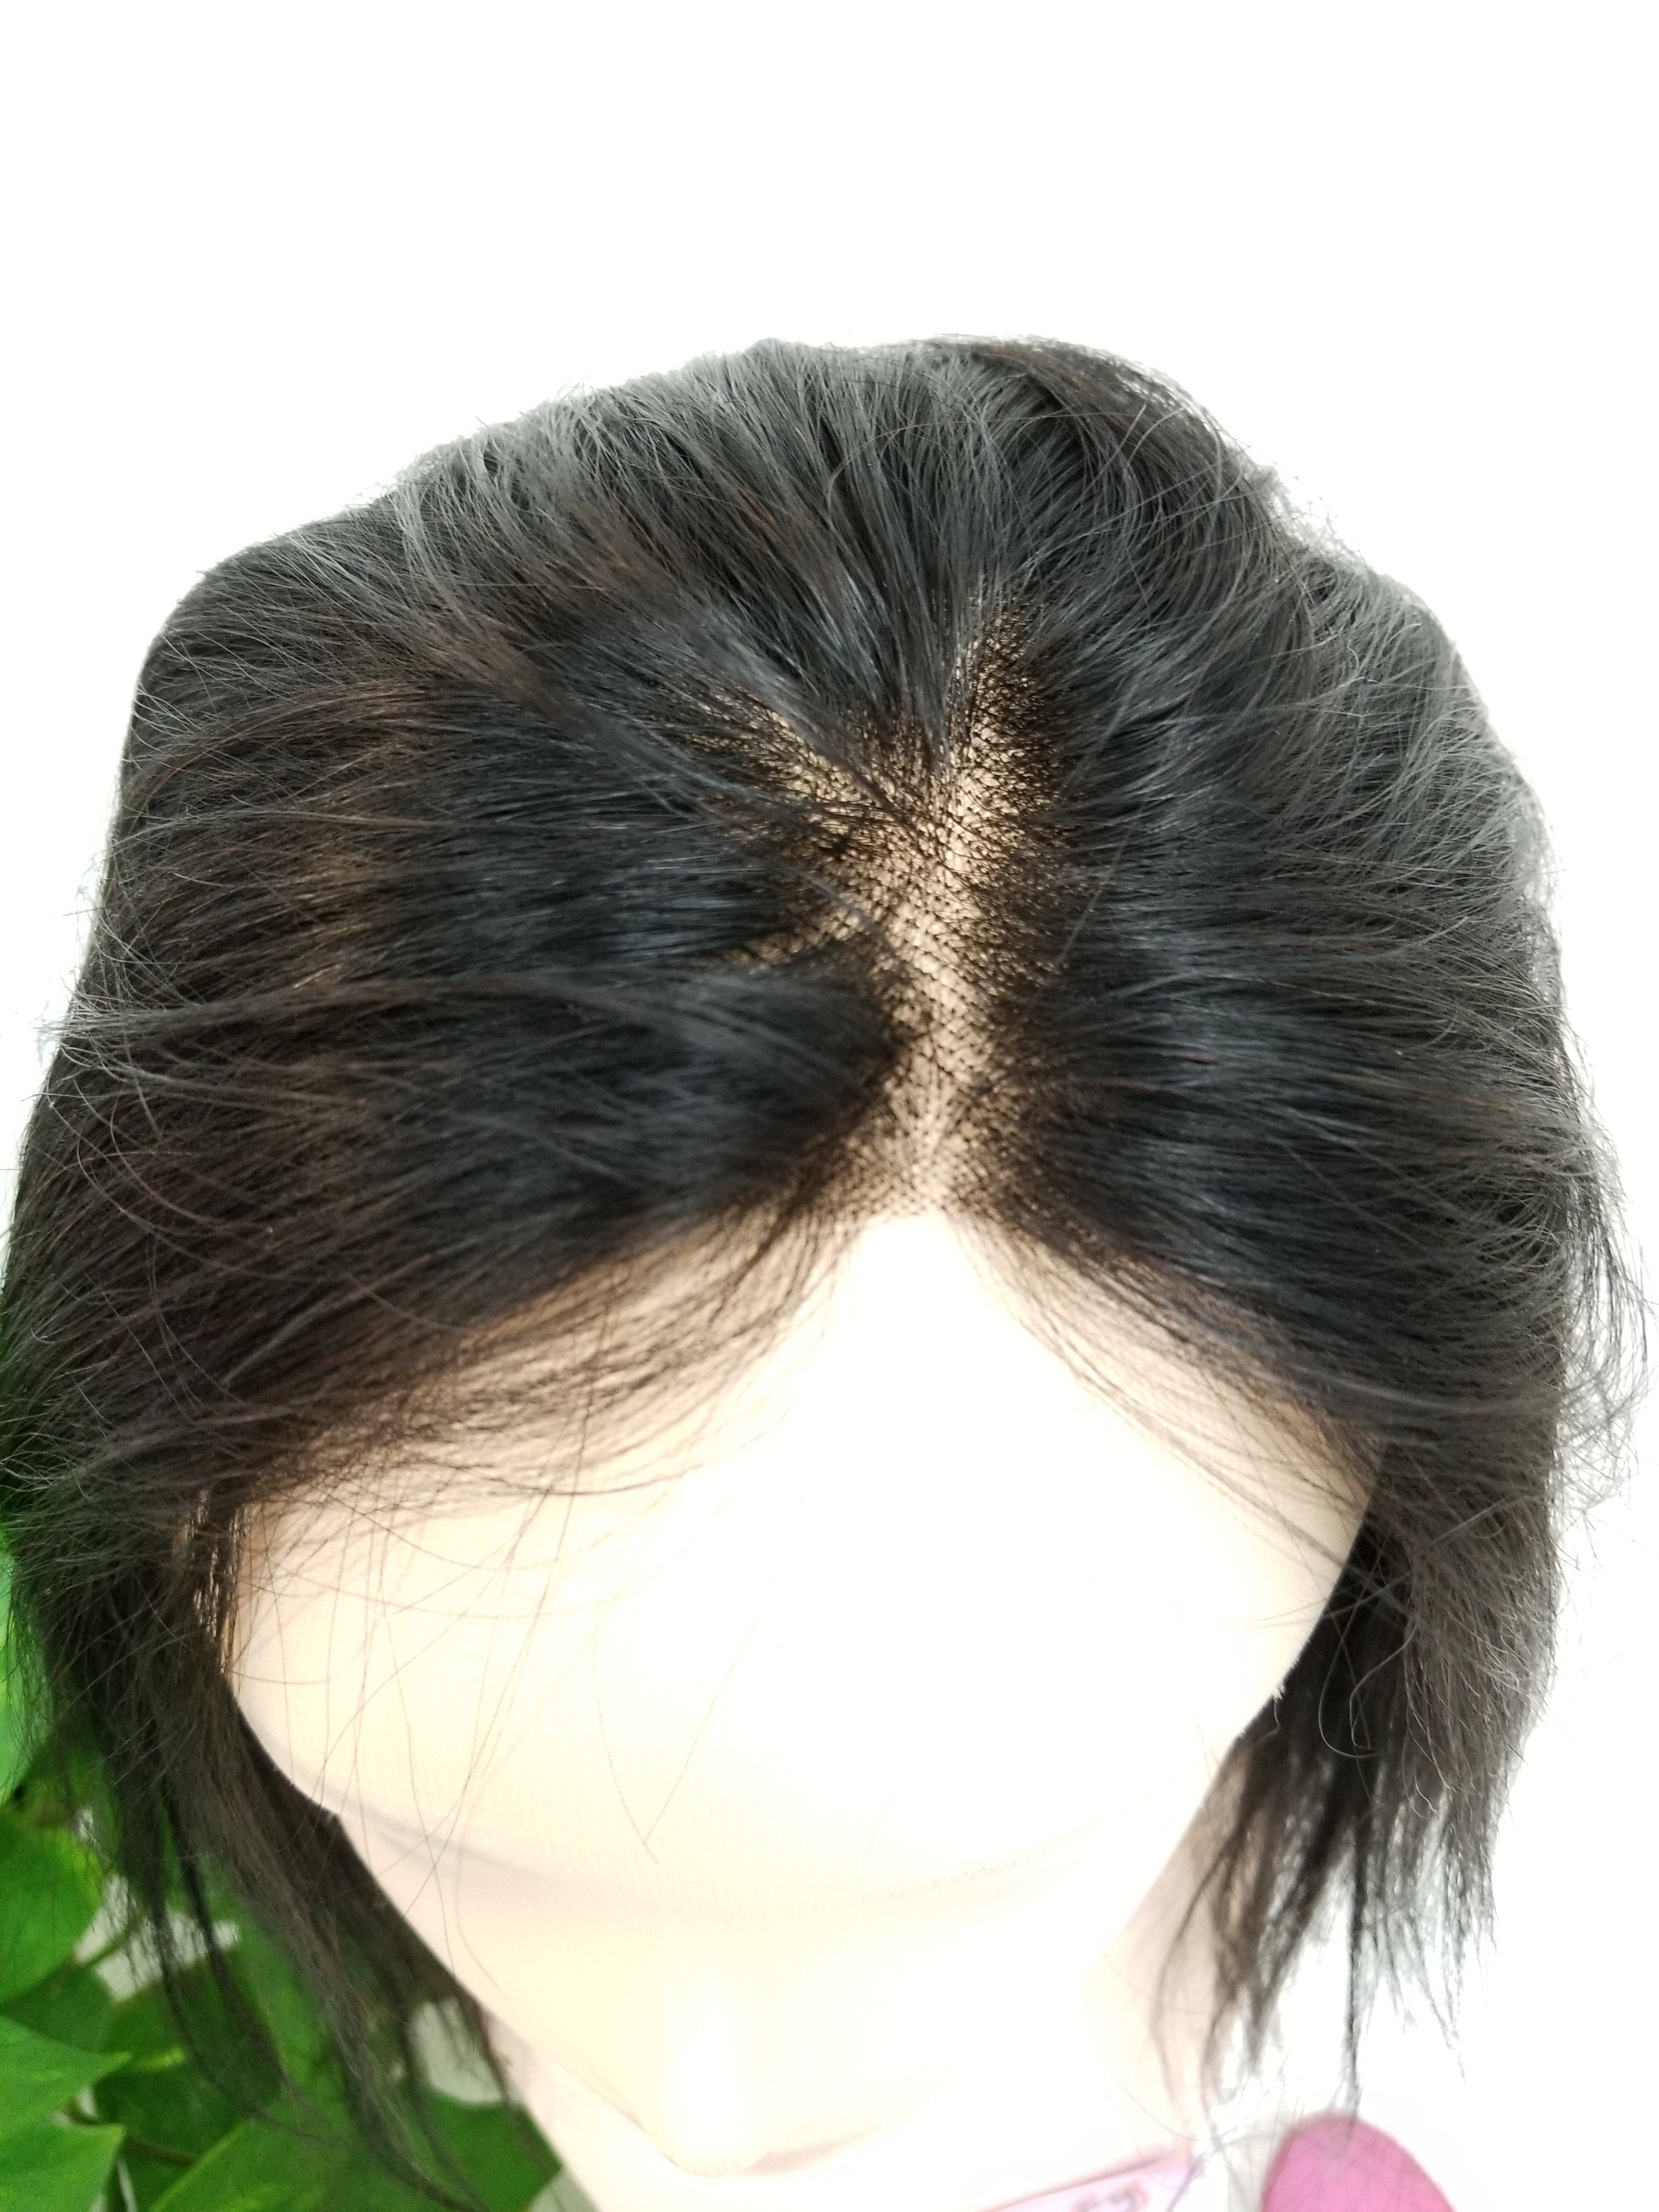 10030 Human Hair Topper Made by Lucy - Wigs Only 4 You